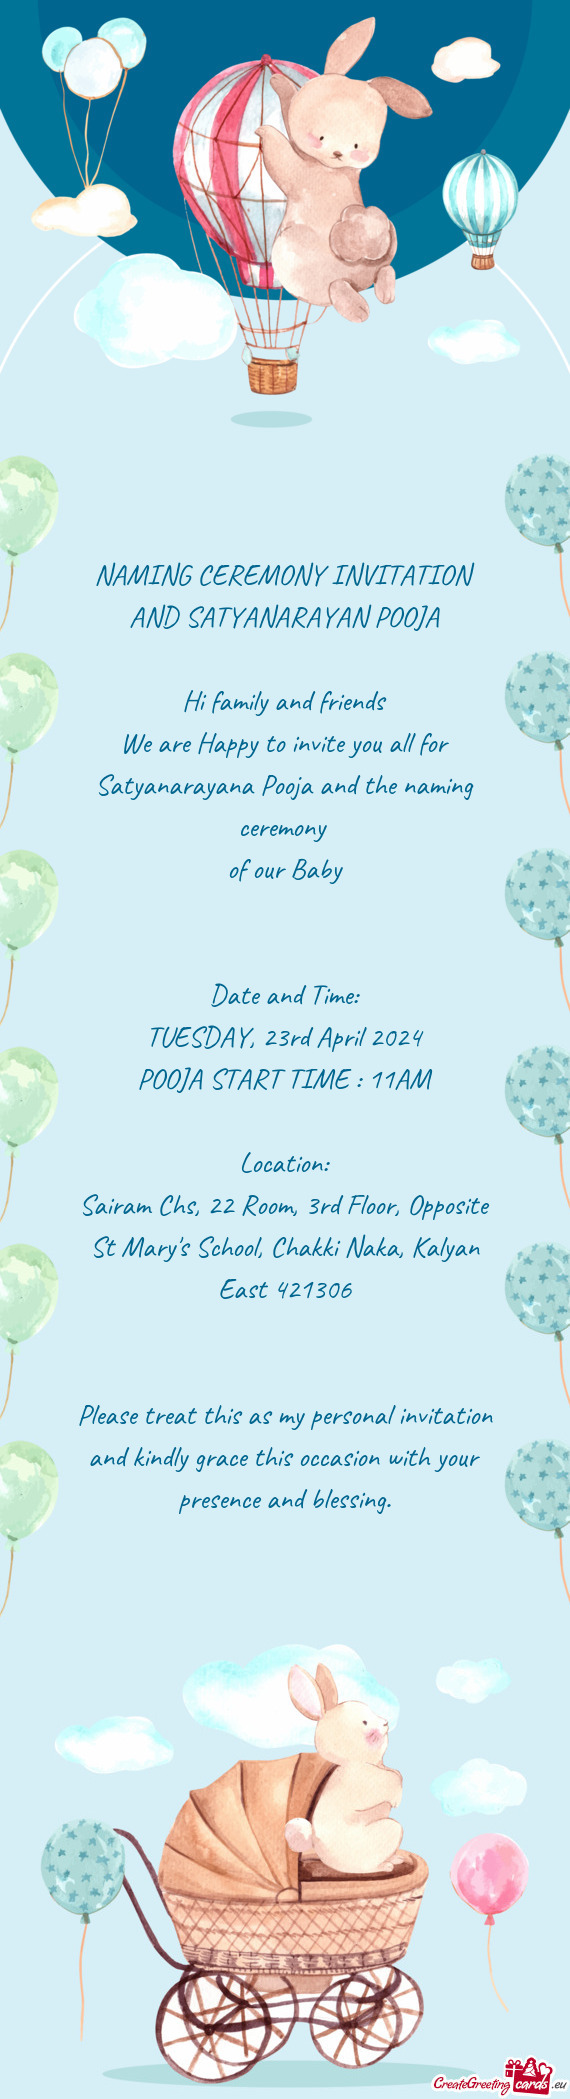 NAMING CEREMONY INVITATION AND SATYANARAYAN POOJA Hi family and friends We are Happy to invite y